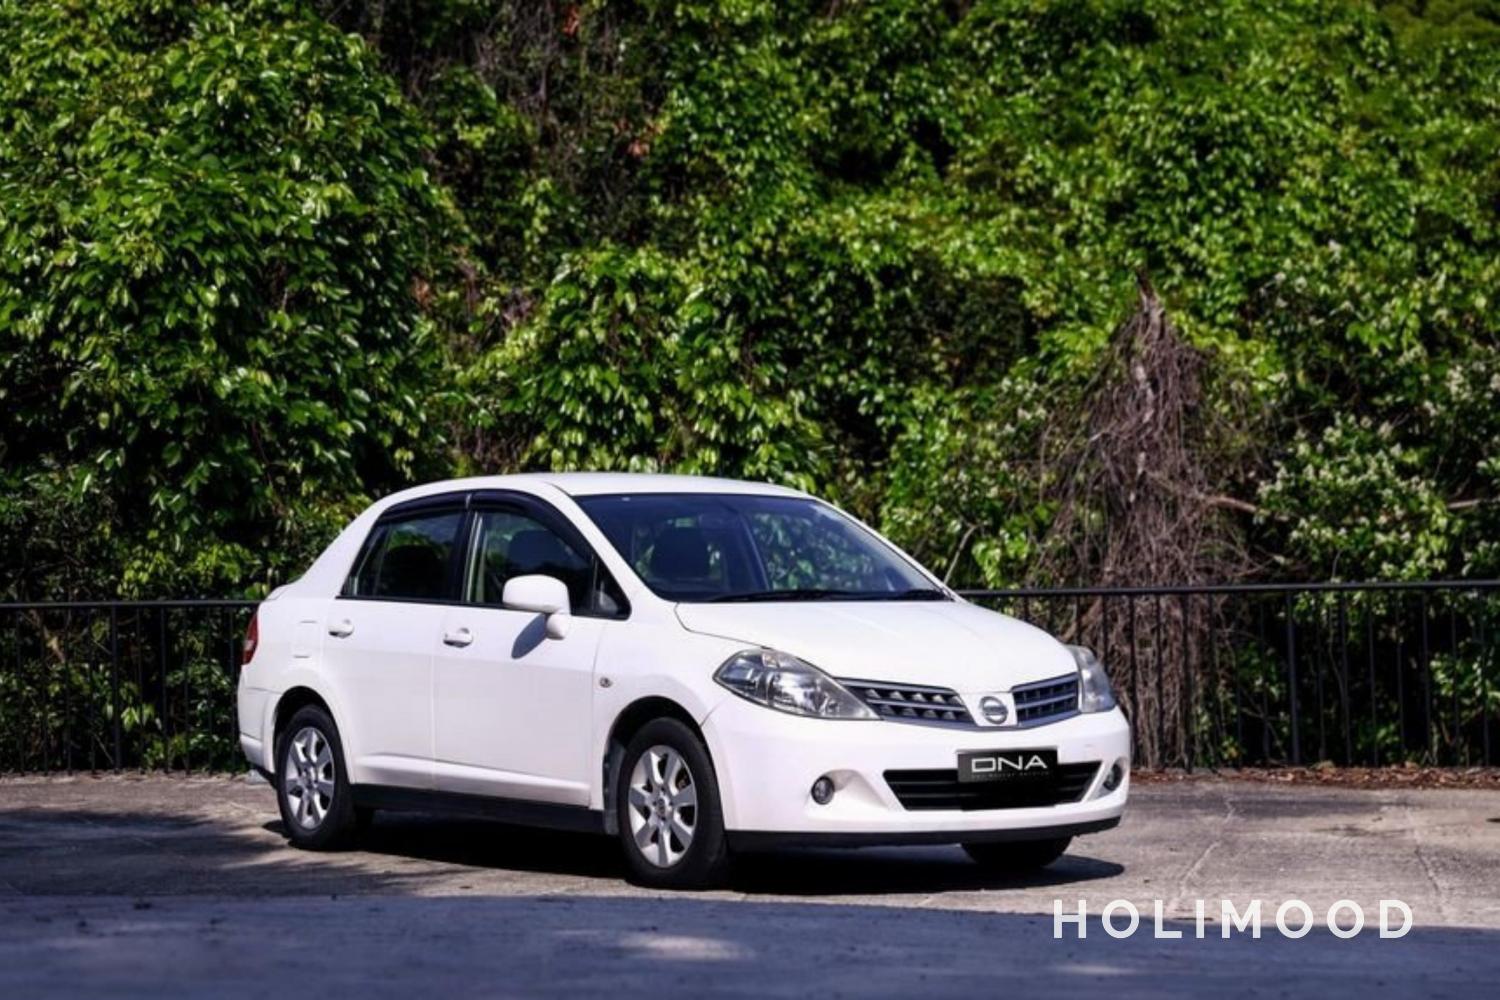 DNA 租車 Nissan Tiida - Practical family car for 5 people（Day Rental） 1